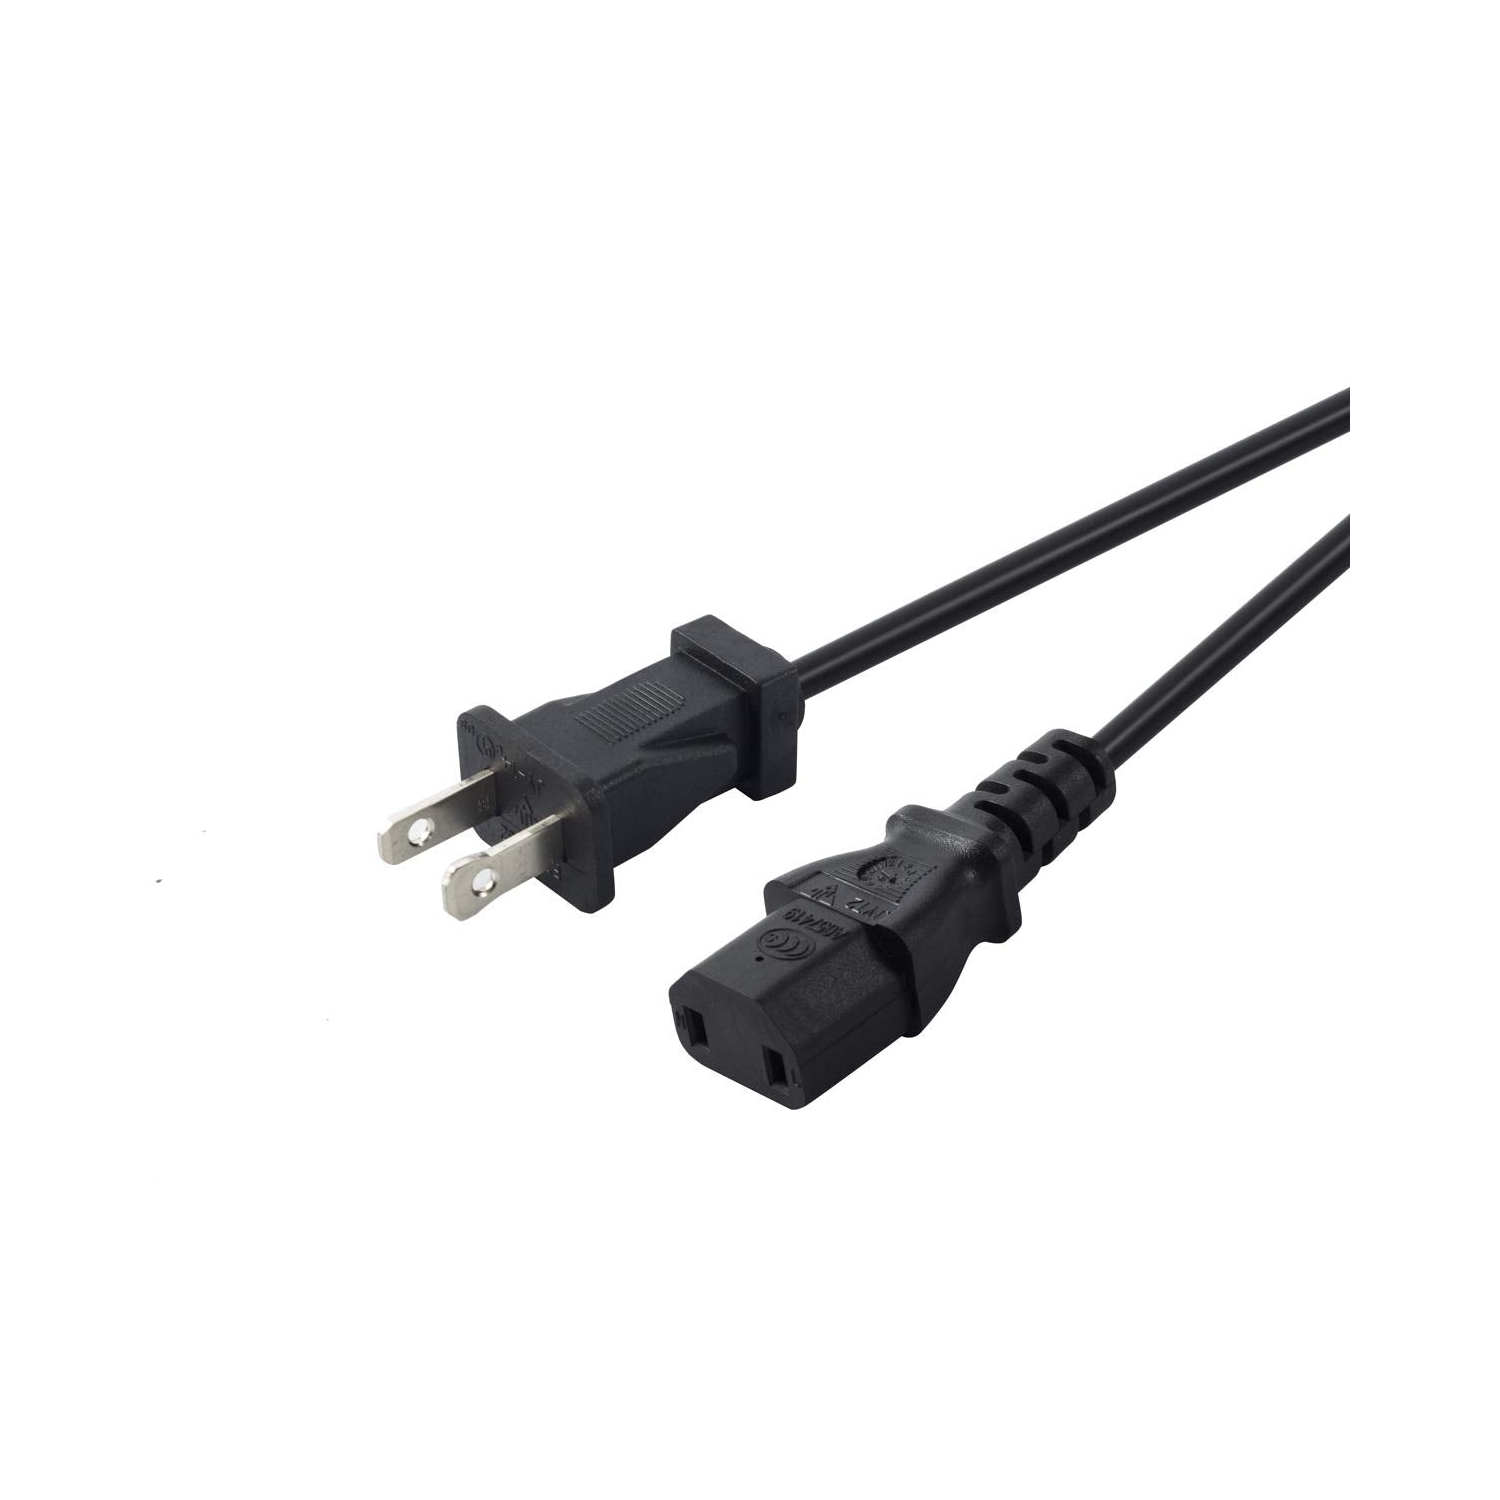 Gaming Power Cable 2 Prong Power Cord - for Xbox One Original, Xbox 360, Playstation 3 & 4 Slim/Pro (6 Feet -